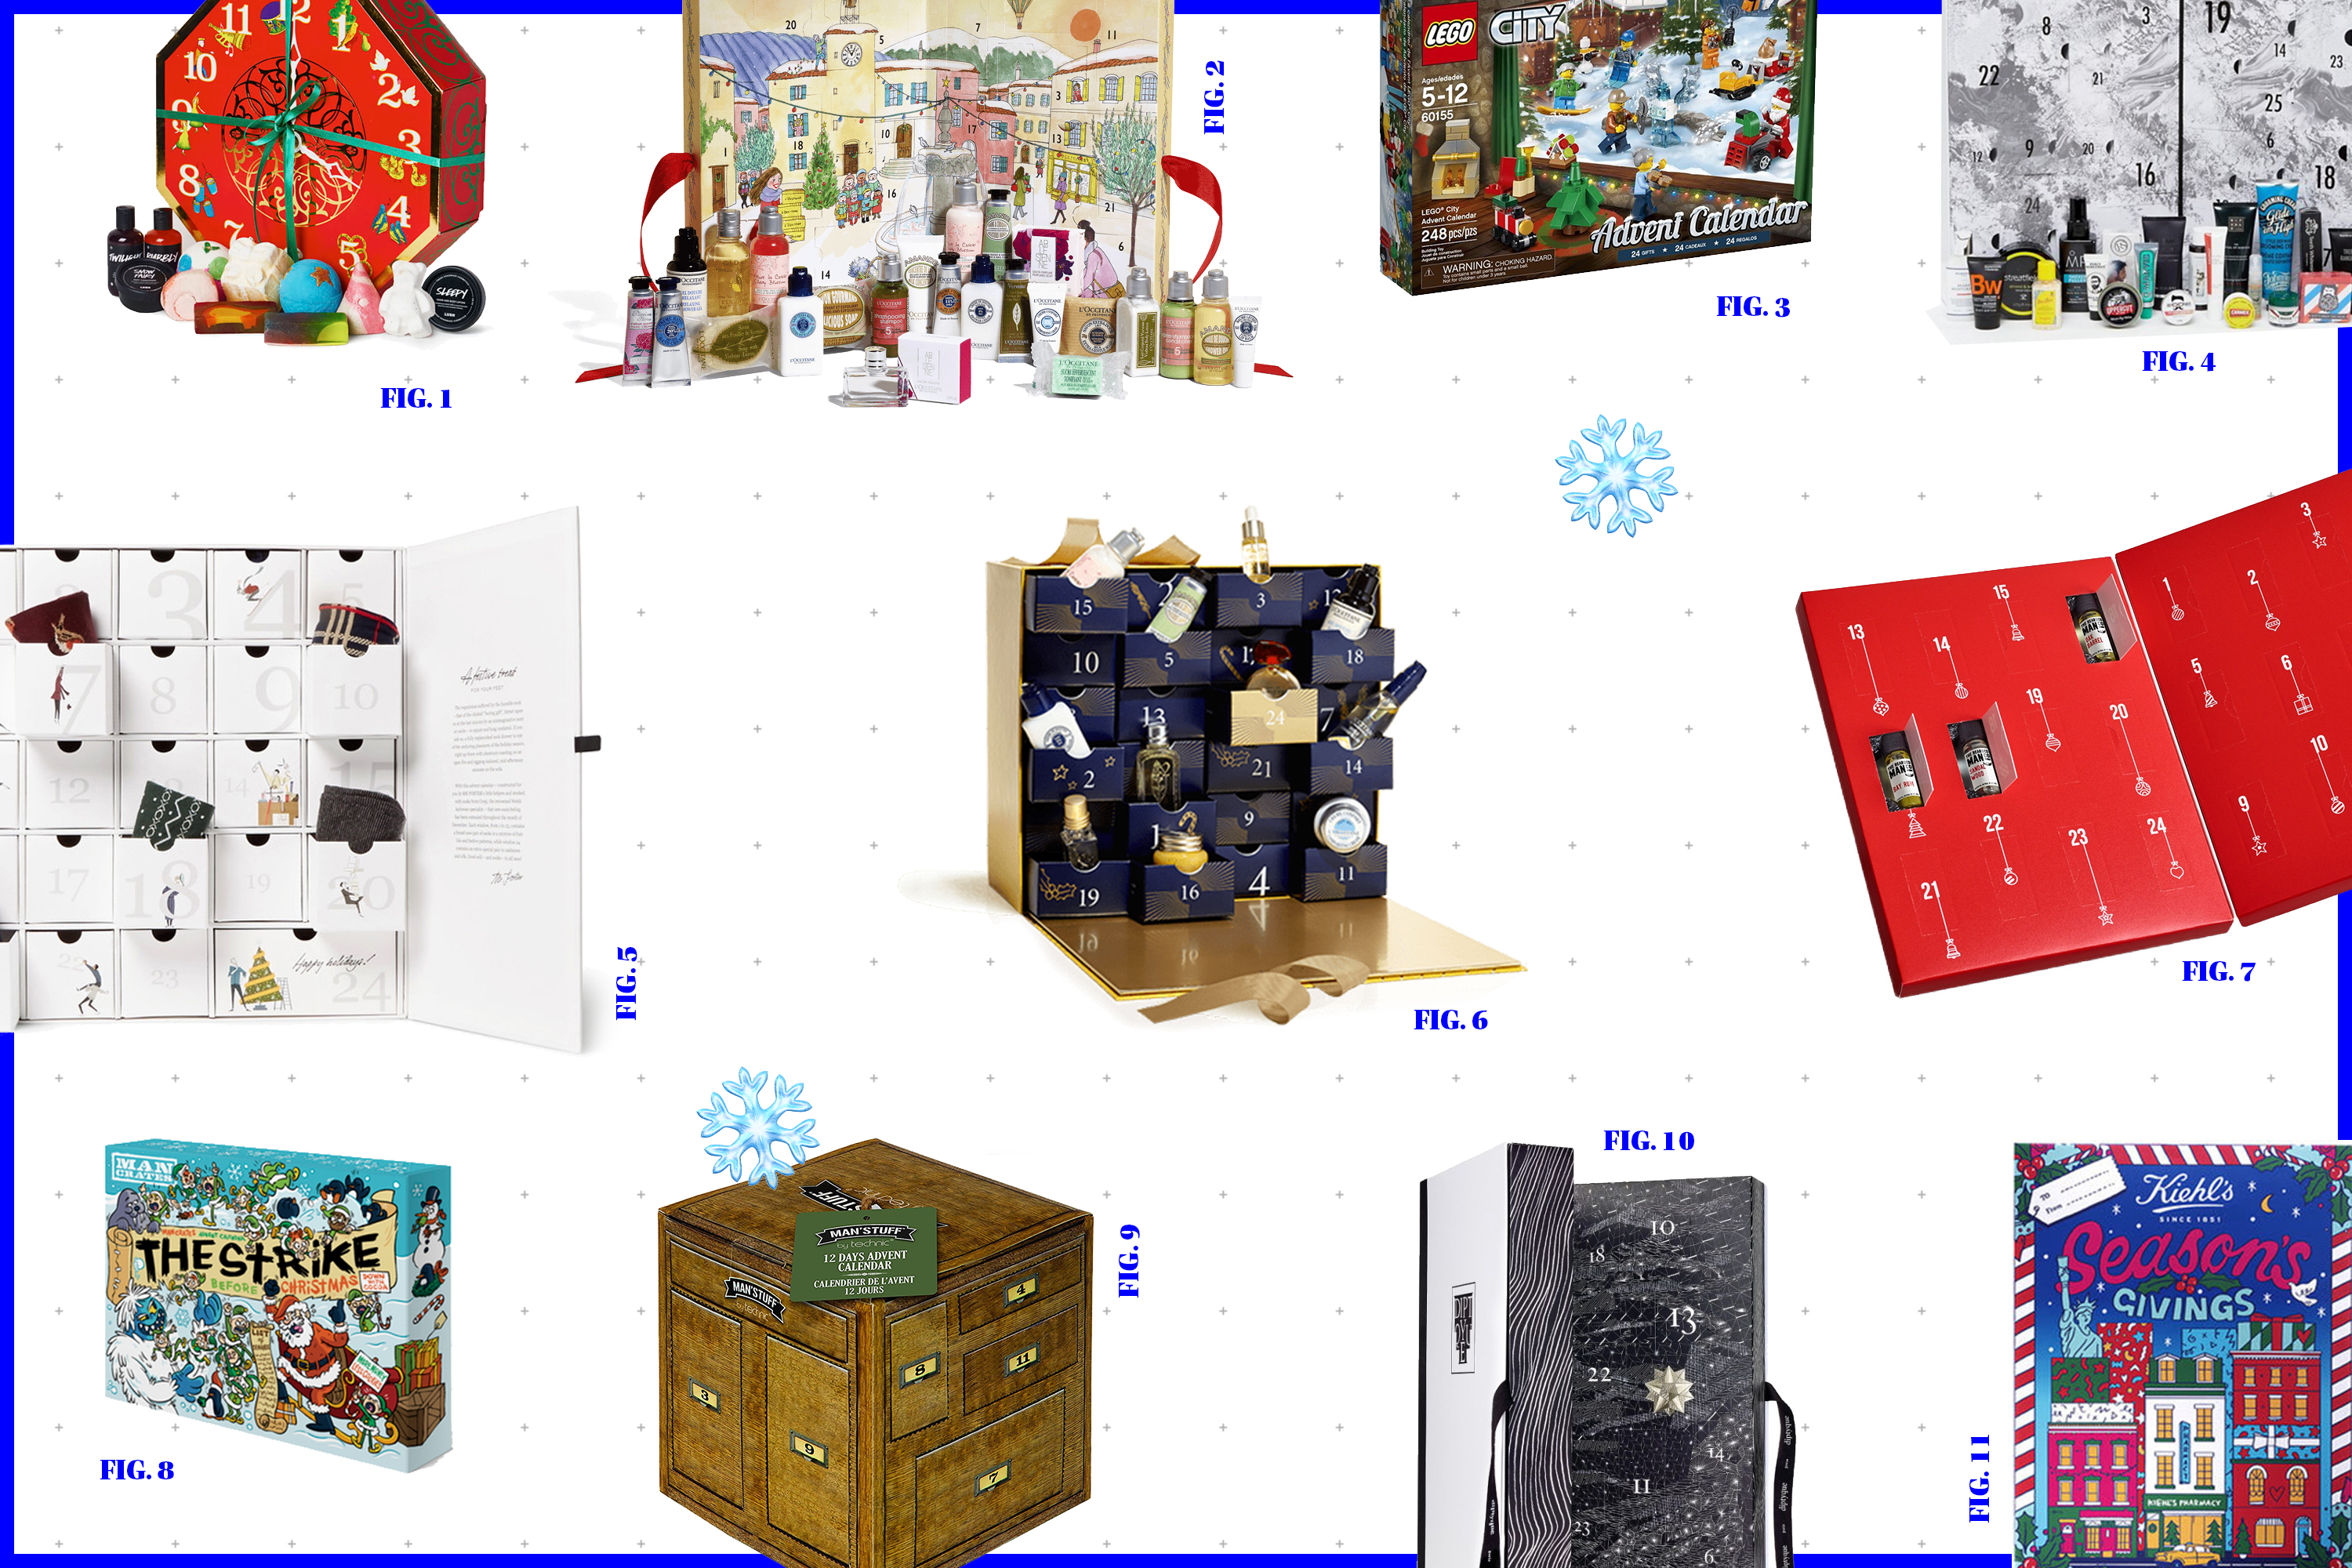 Jeff On The Road - Holidays - Gifts - The 10 Best Advent Calendars For Men - All photos are under Copyright © 2017 Jeff Frenette Photography / dezjeff. To use the photos, please contact me at dezjeff@me.com.